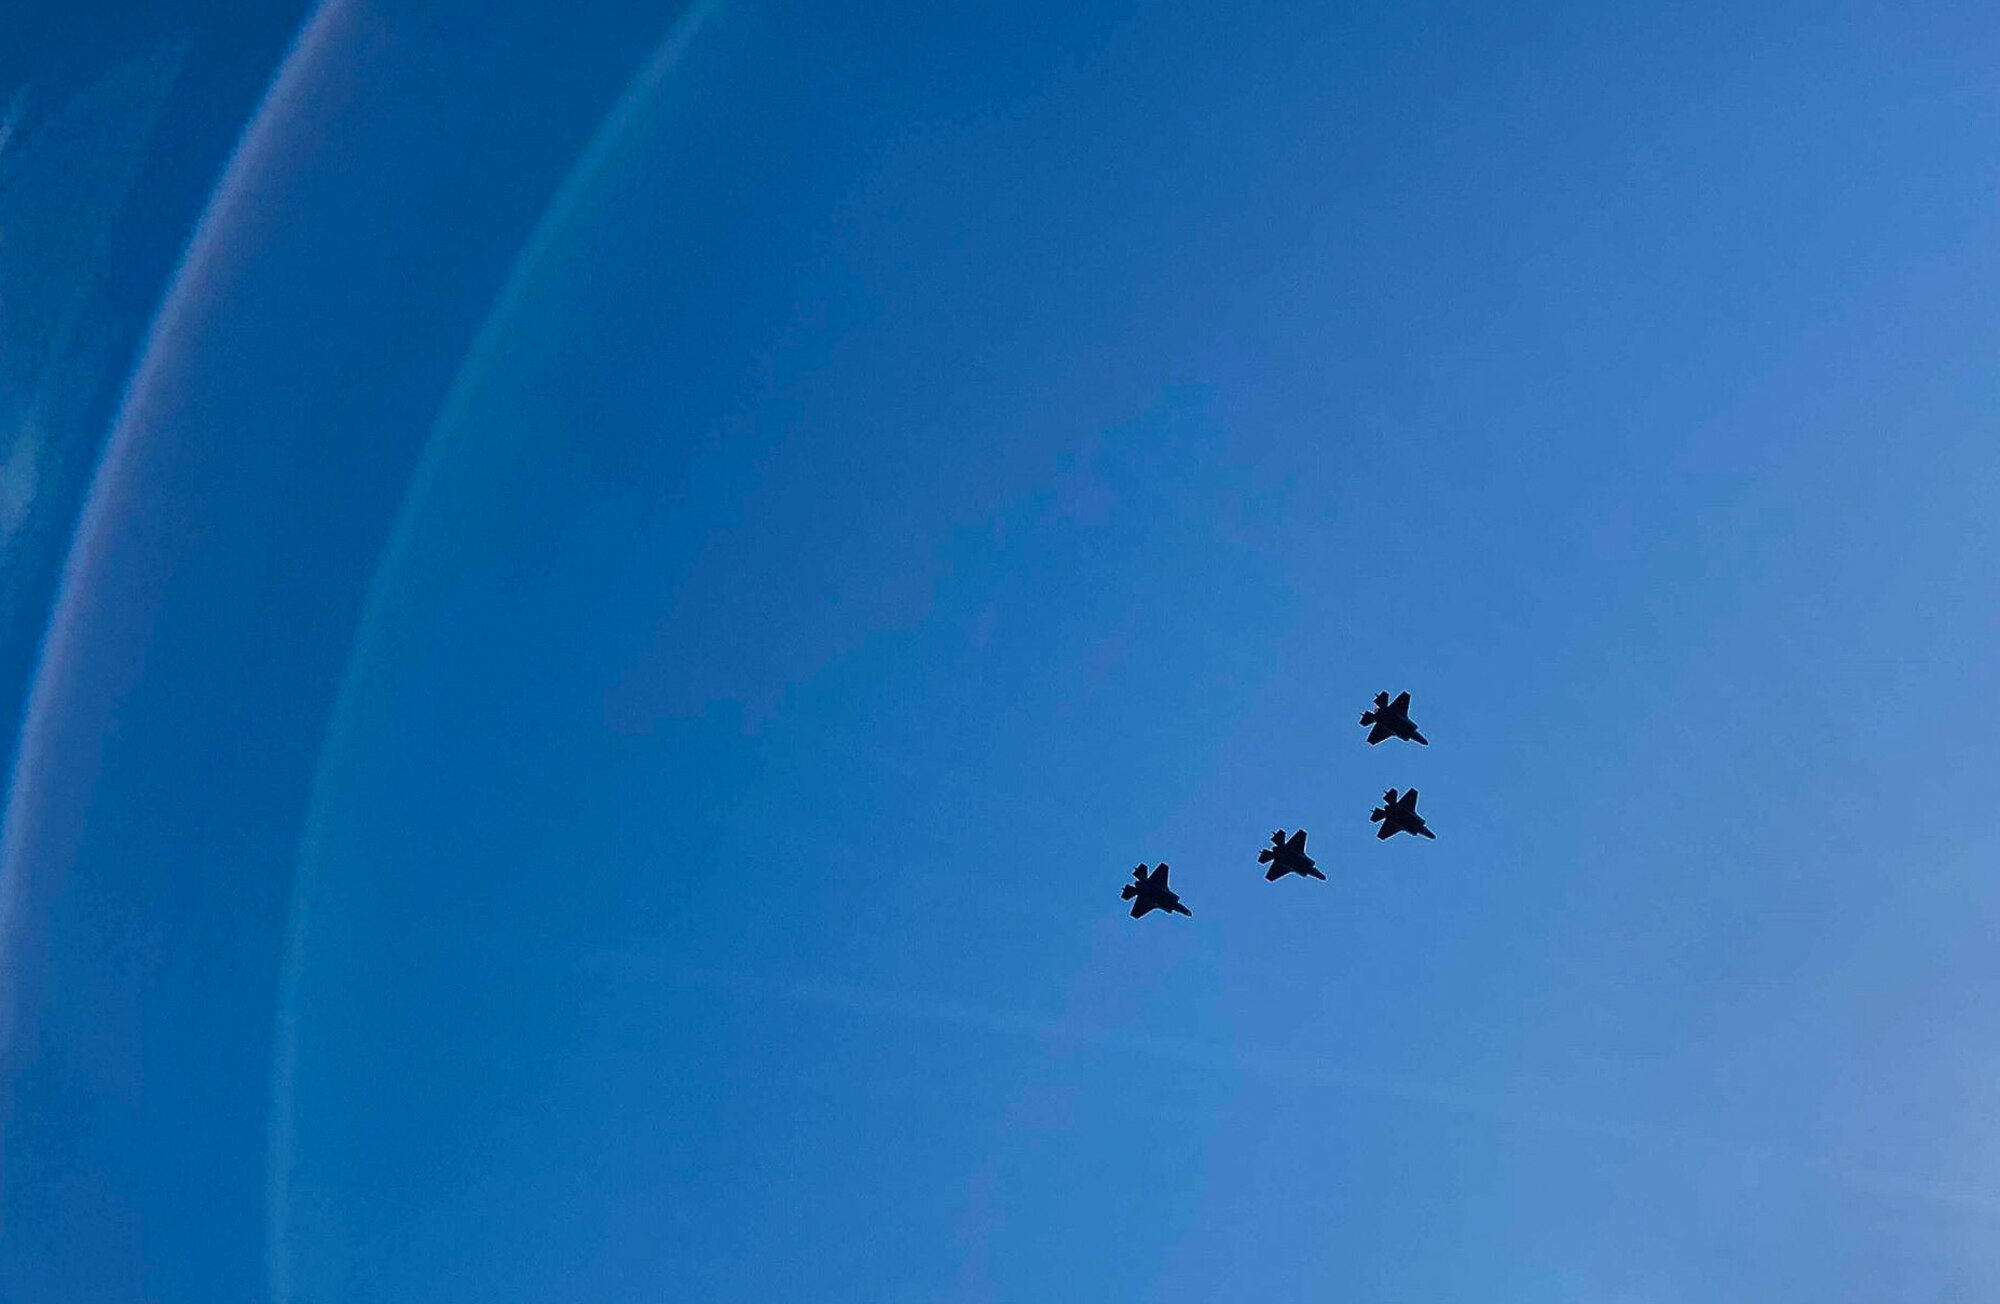 Four F-35A Lightning II fighter jets from the 6th Weapons Squadron, Nellis Air Force Base, Nevada perform the flyover during the national anthem at the Lockheed Martin Armed Forces Bowl on January 4, 2020 at Amon G. Carter Stadium in Fort Worth, Texas. The ‘Bowl for the Brave’ included a Medal of Honor recipient presentation and a mass joint military branch swear-in  ceremony that welcomed 125 new recruits into its ranks. (U.S. Air Force photo by Capt. Jessica Gross)